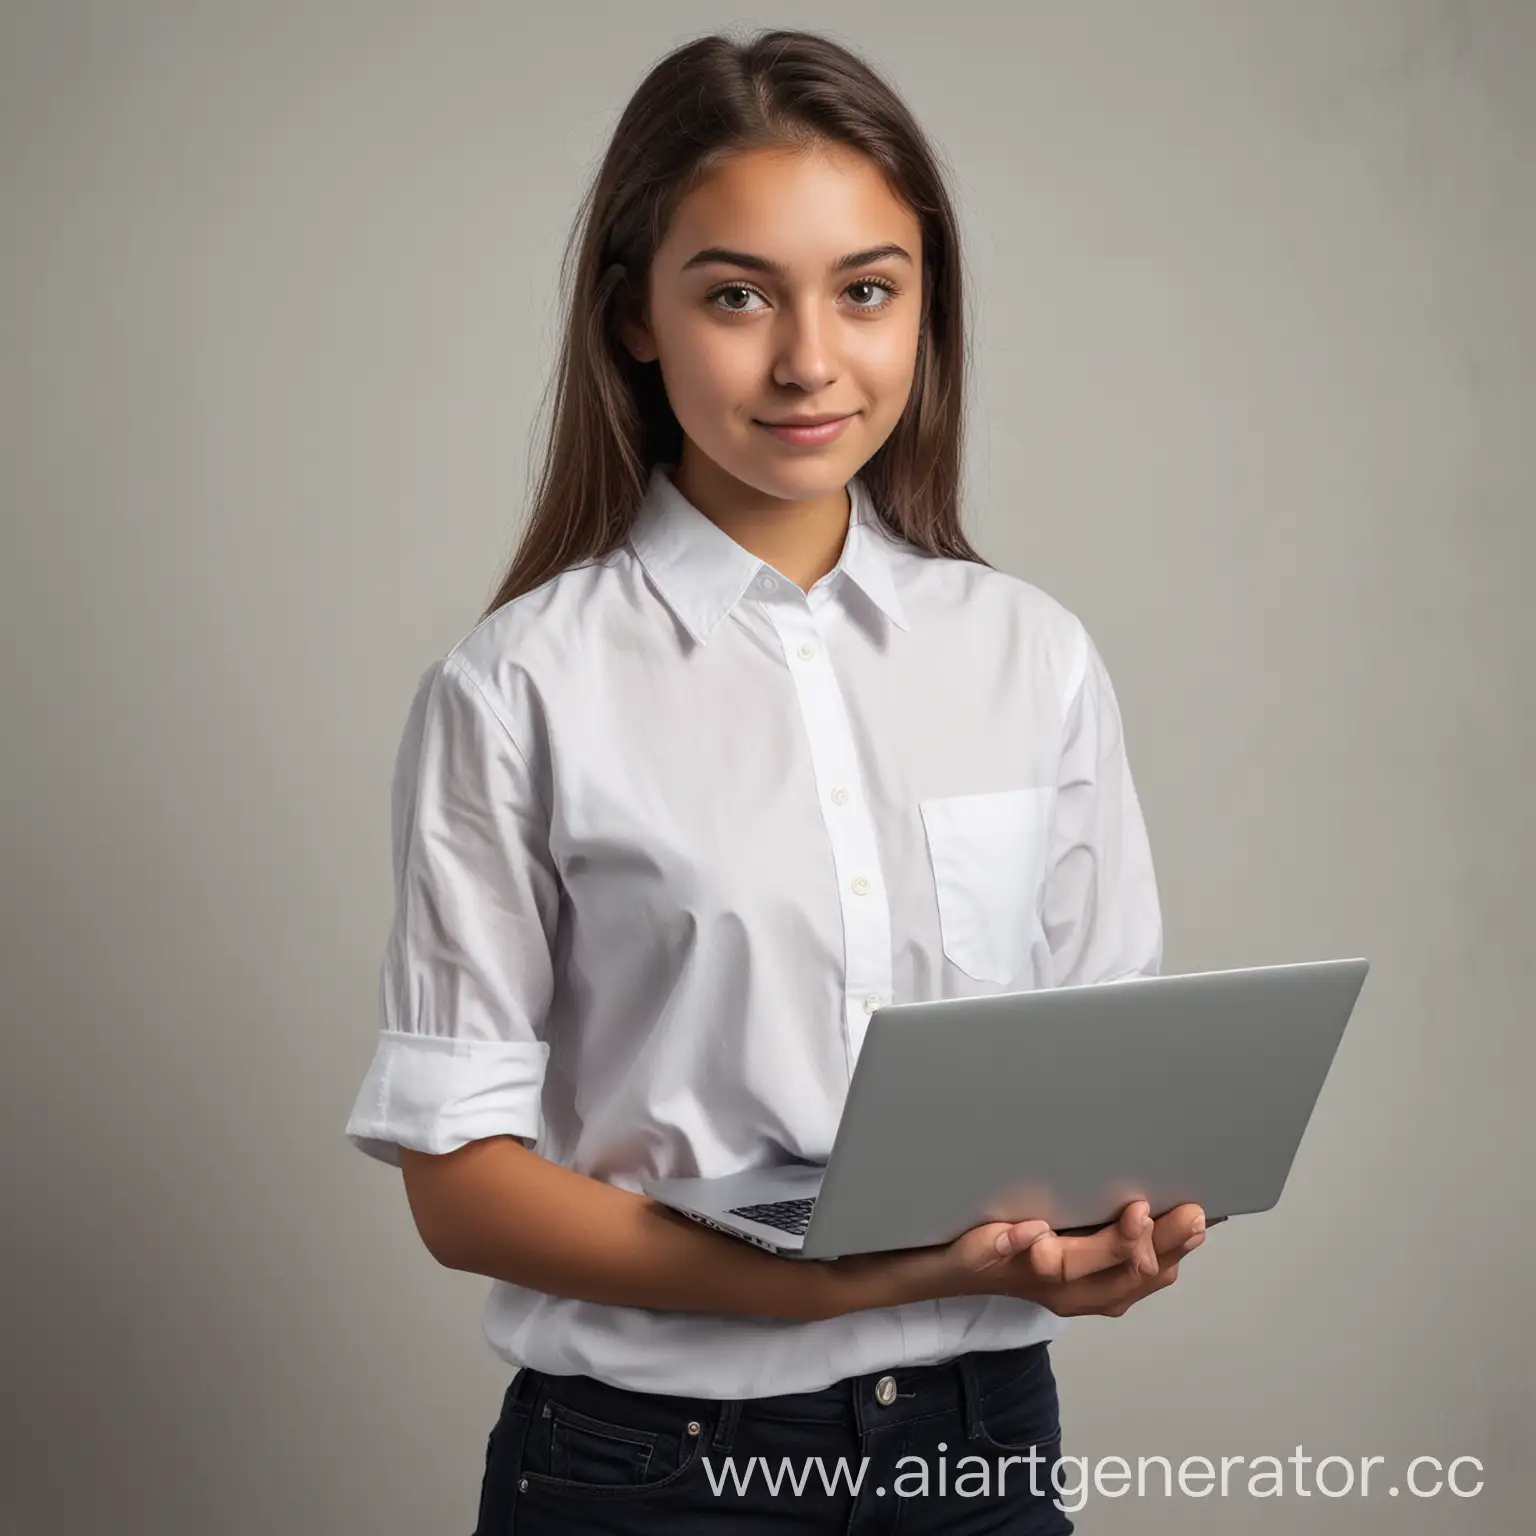 Student-Standing-with-Laptop-in-Hand-Wearing-White-Shirt